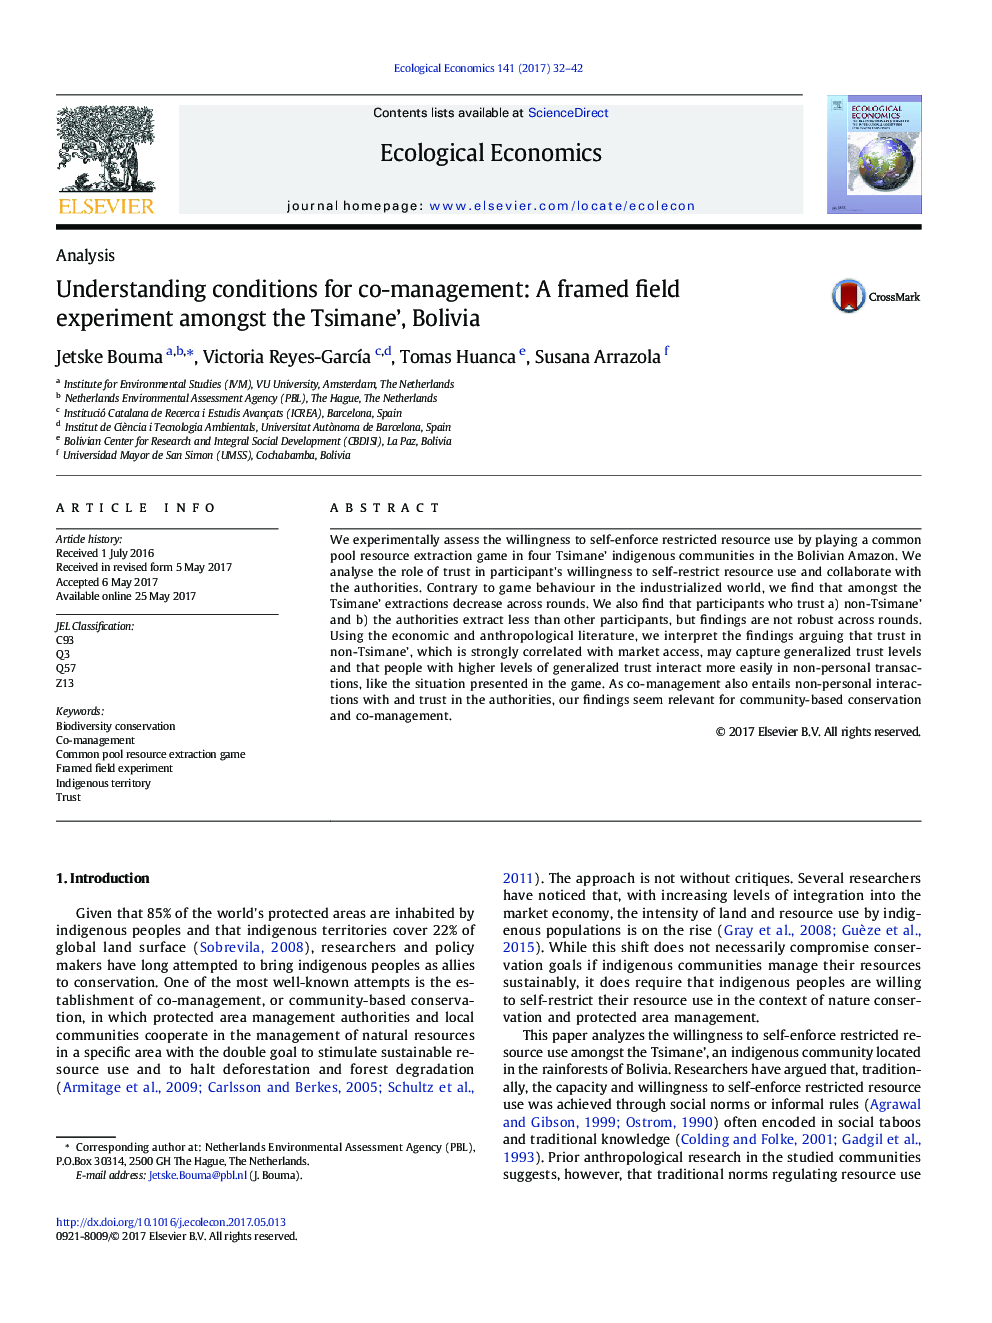 Understanding conditions for co-management: A framed field experiment amongst the Tsimane', Bolivia